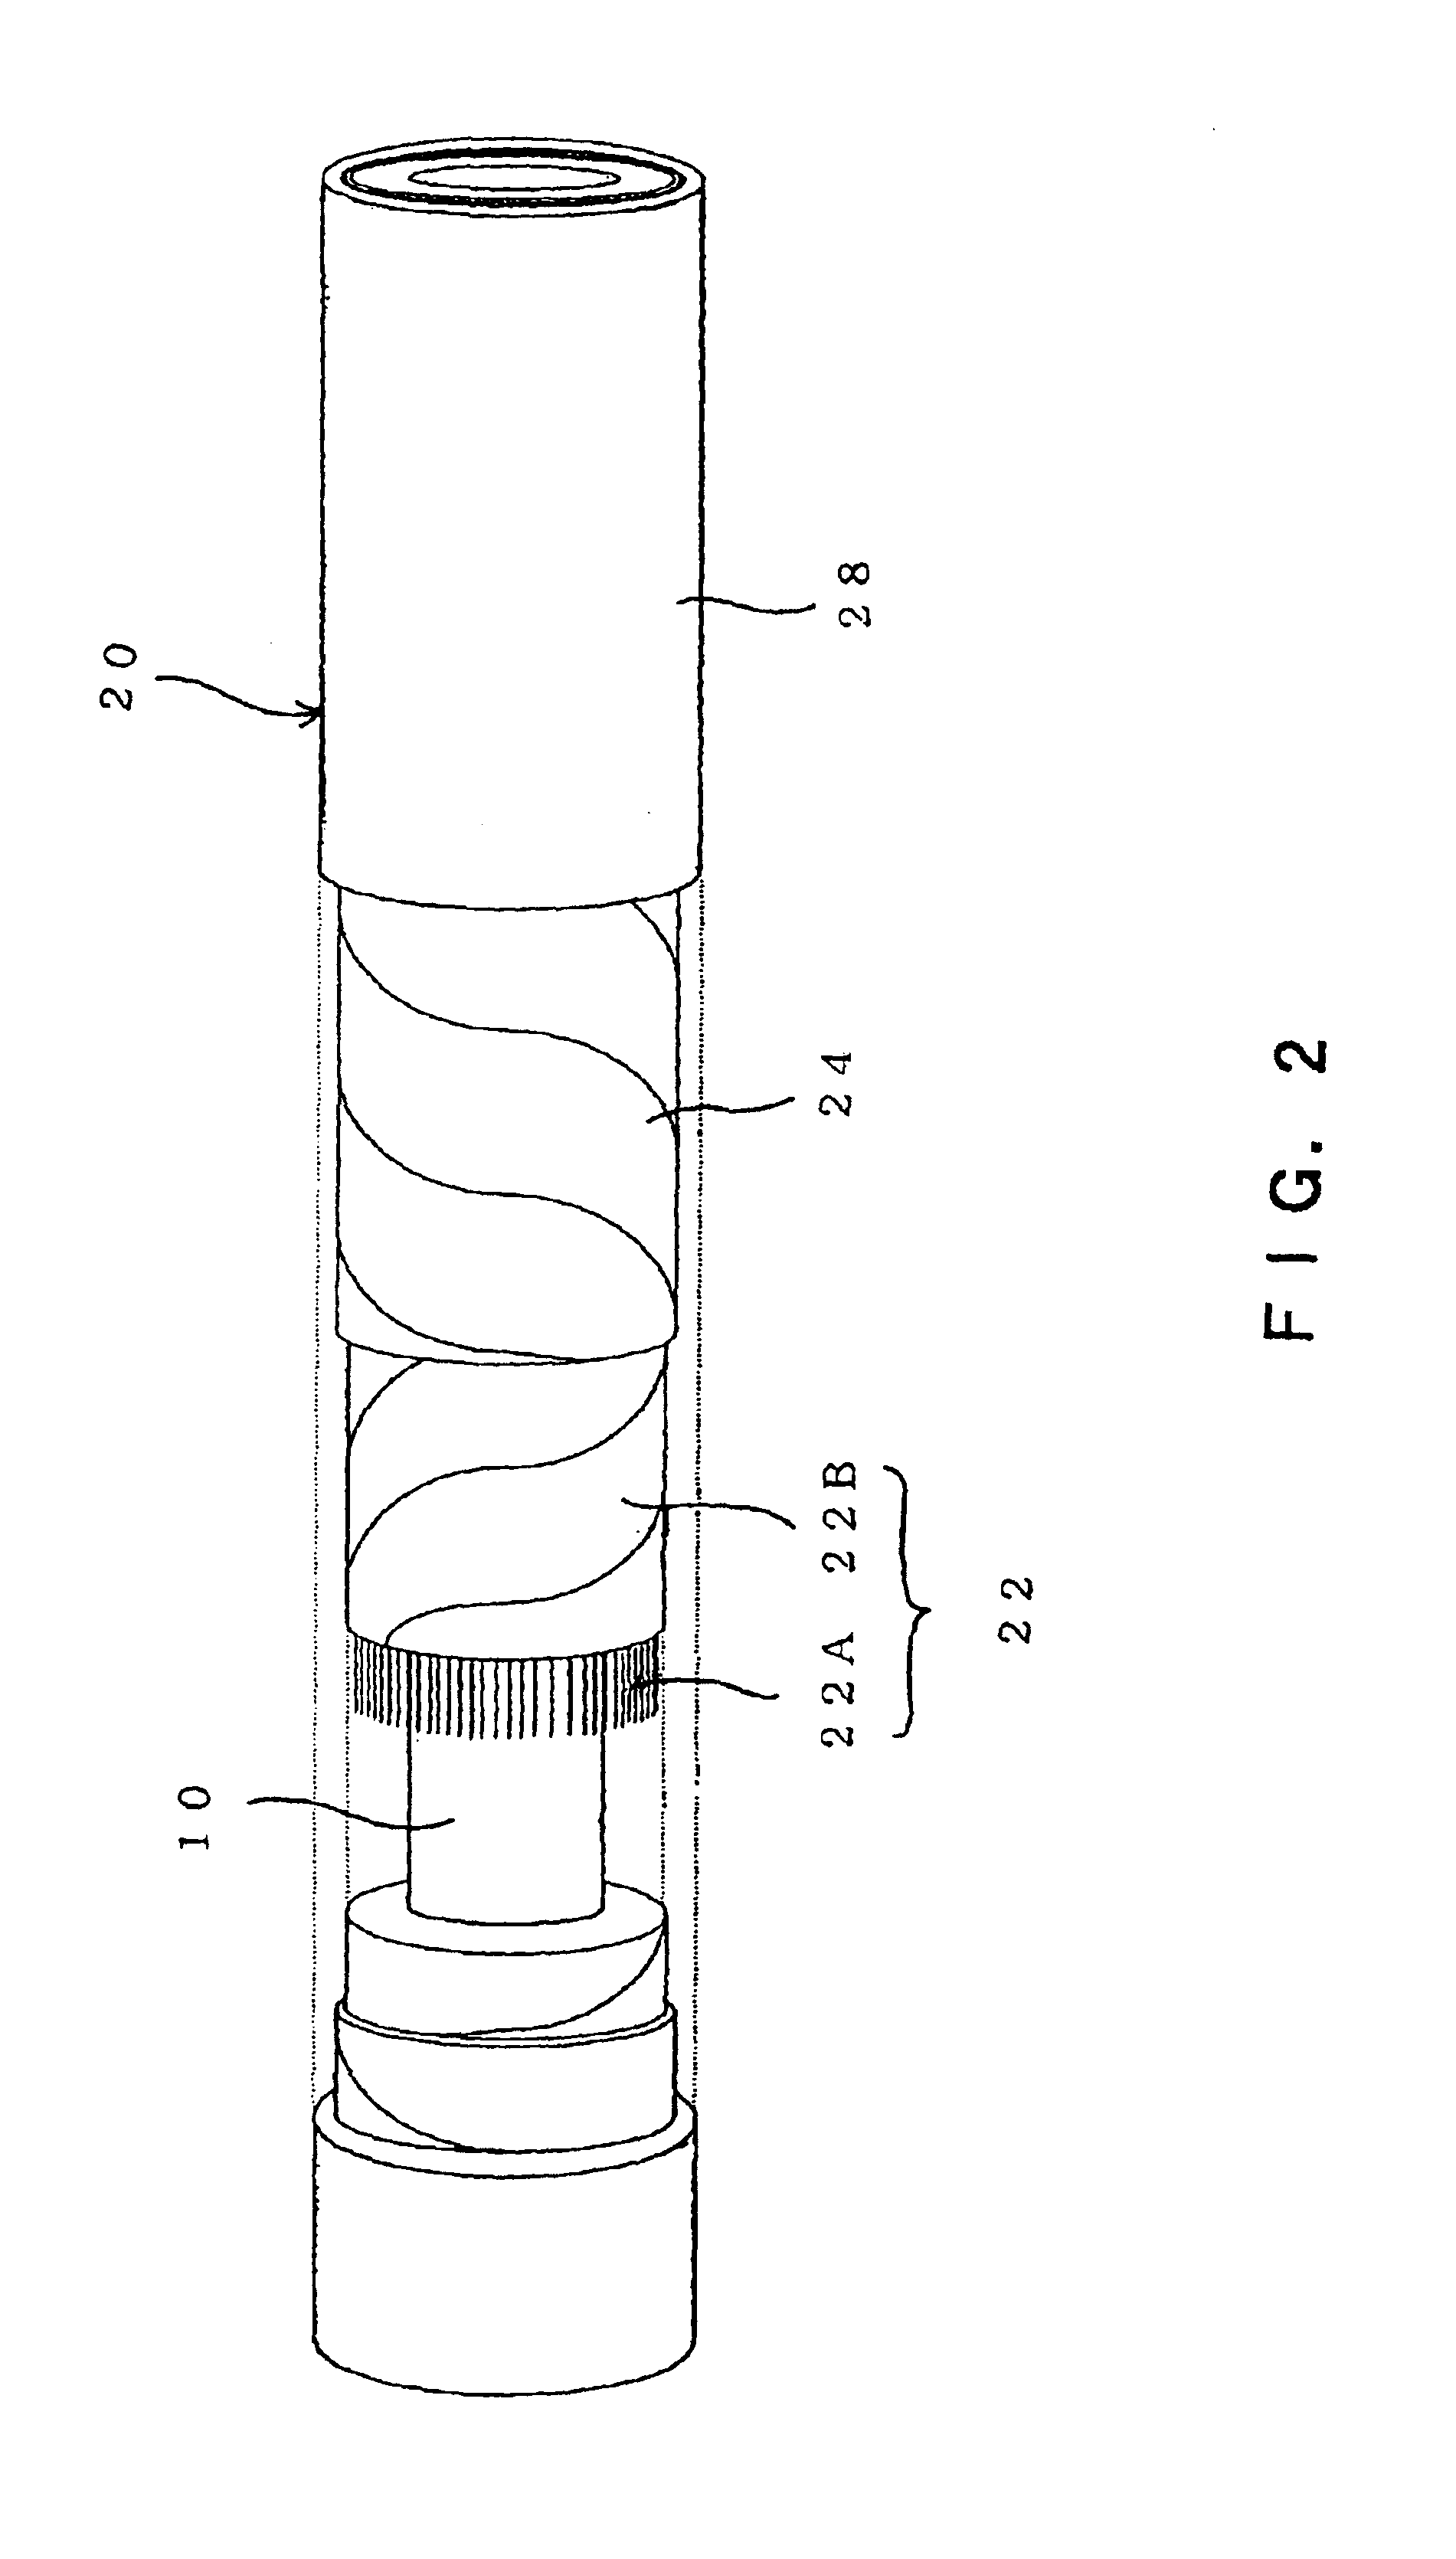 Optical fiber, optical fiber cable, and radiation detecting system using such